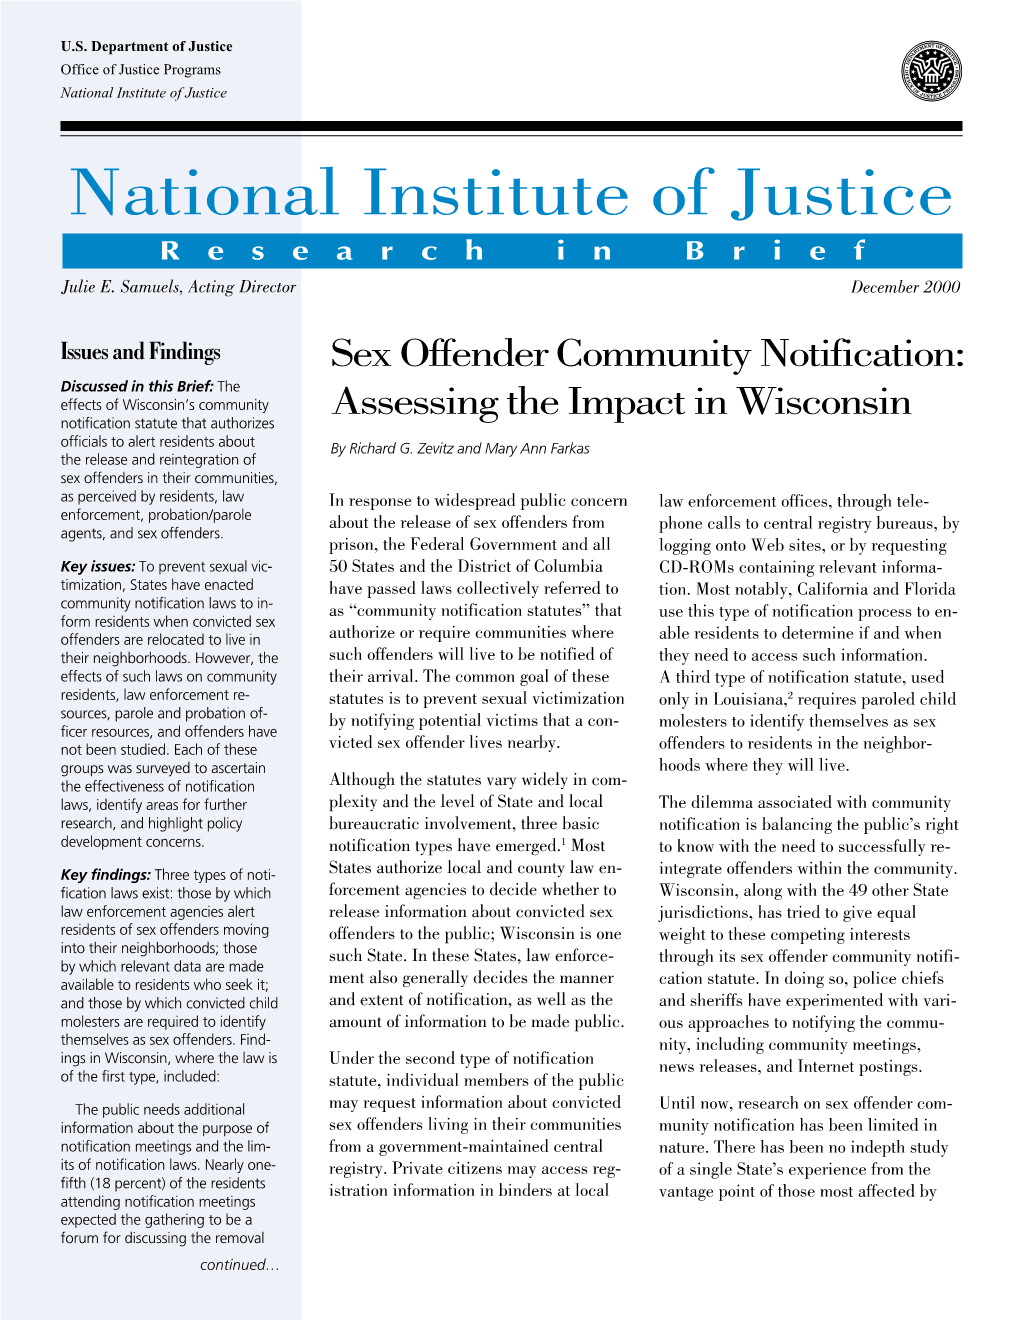 Sex Offender Community Notification: Assessing the Impact in Wisconsin